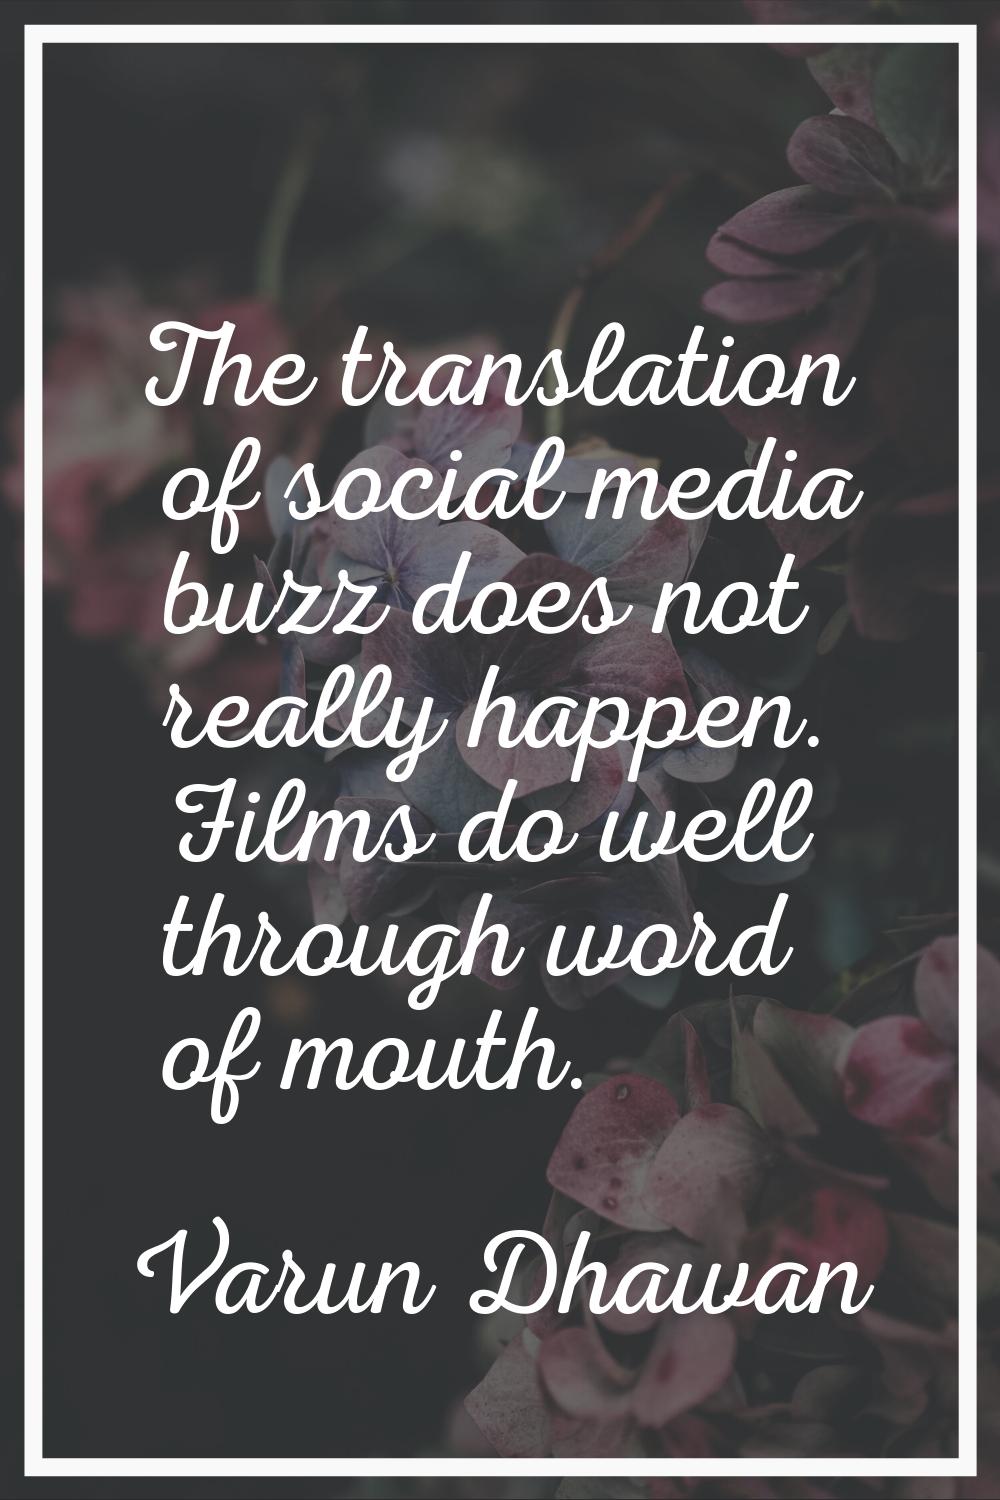 The translation of social media buzz does not really happen. Films do well through word of mouth.